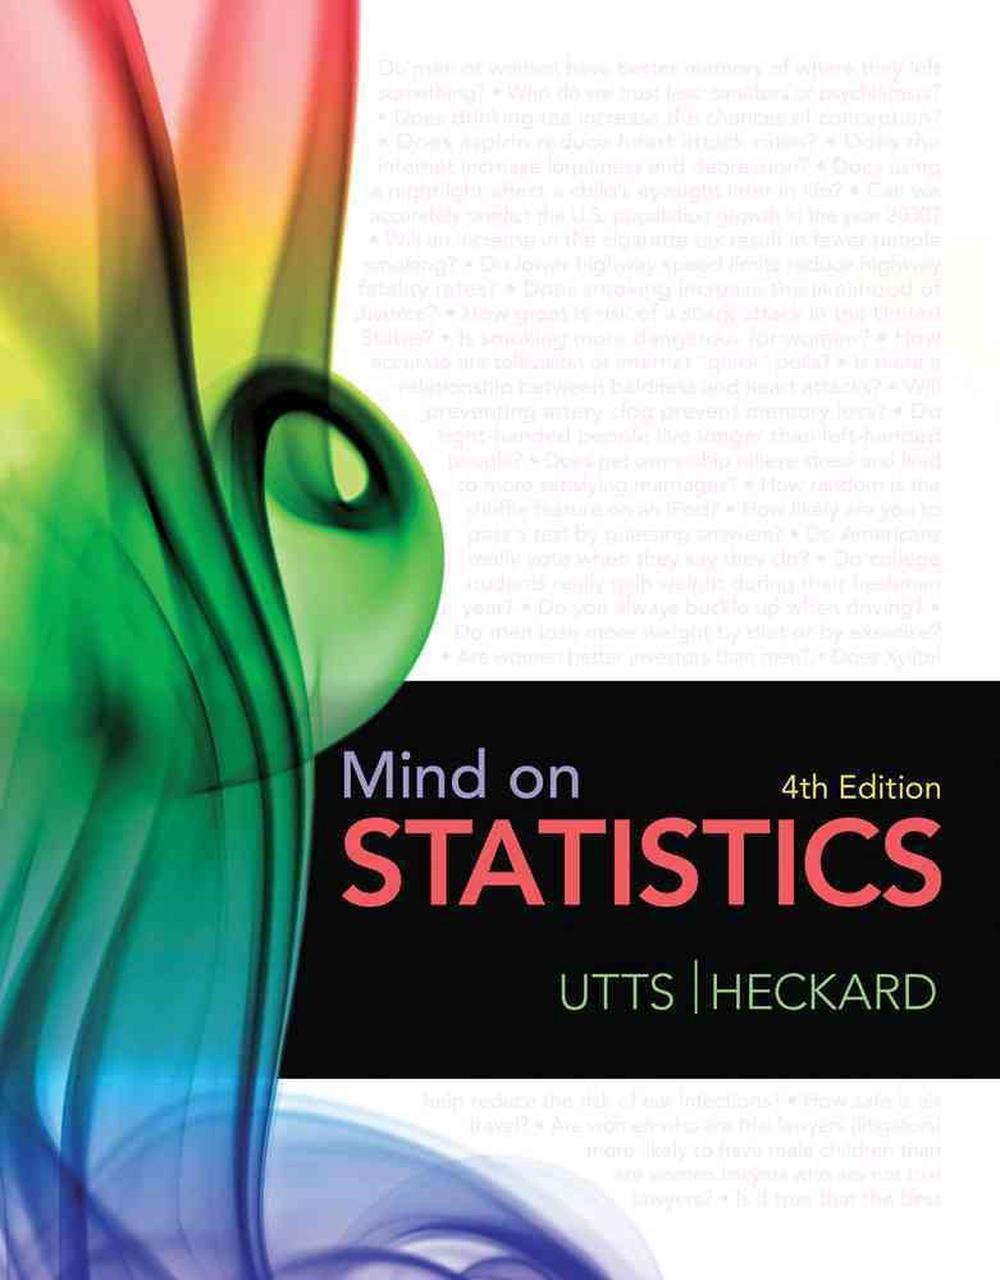 Mind on Statistics by Jessica M. Utts, Hardcover, 9780538733489 Buy online at The Nile